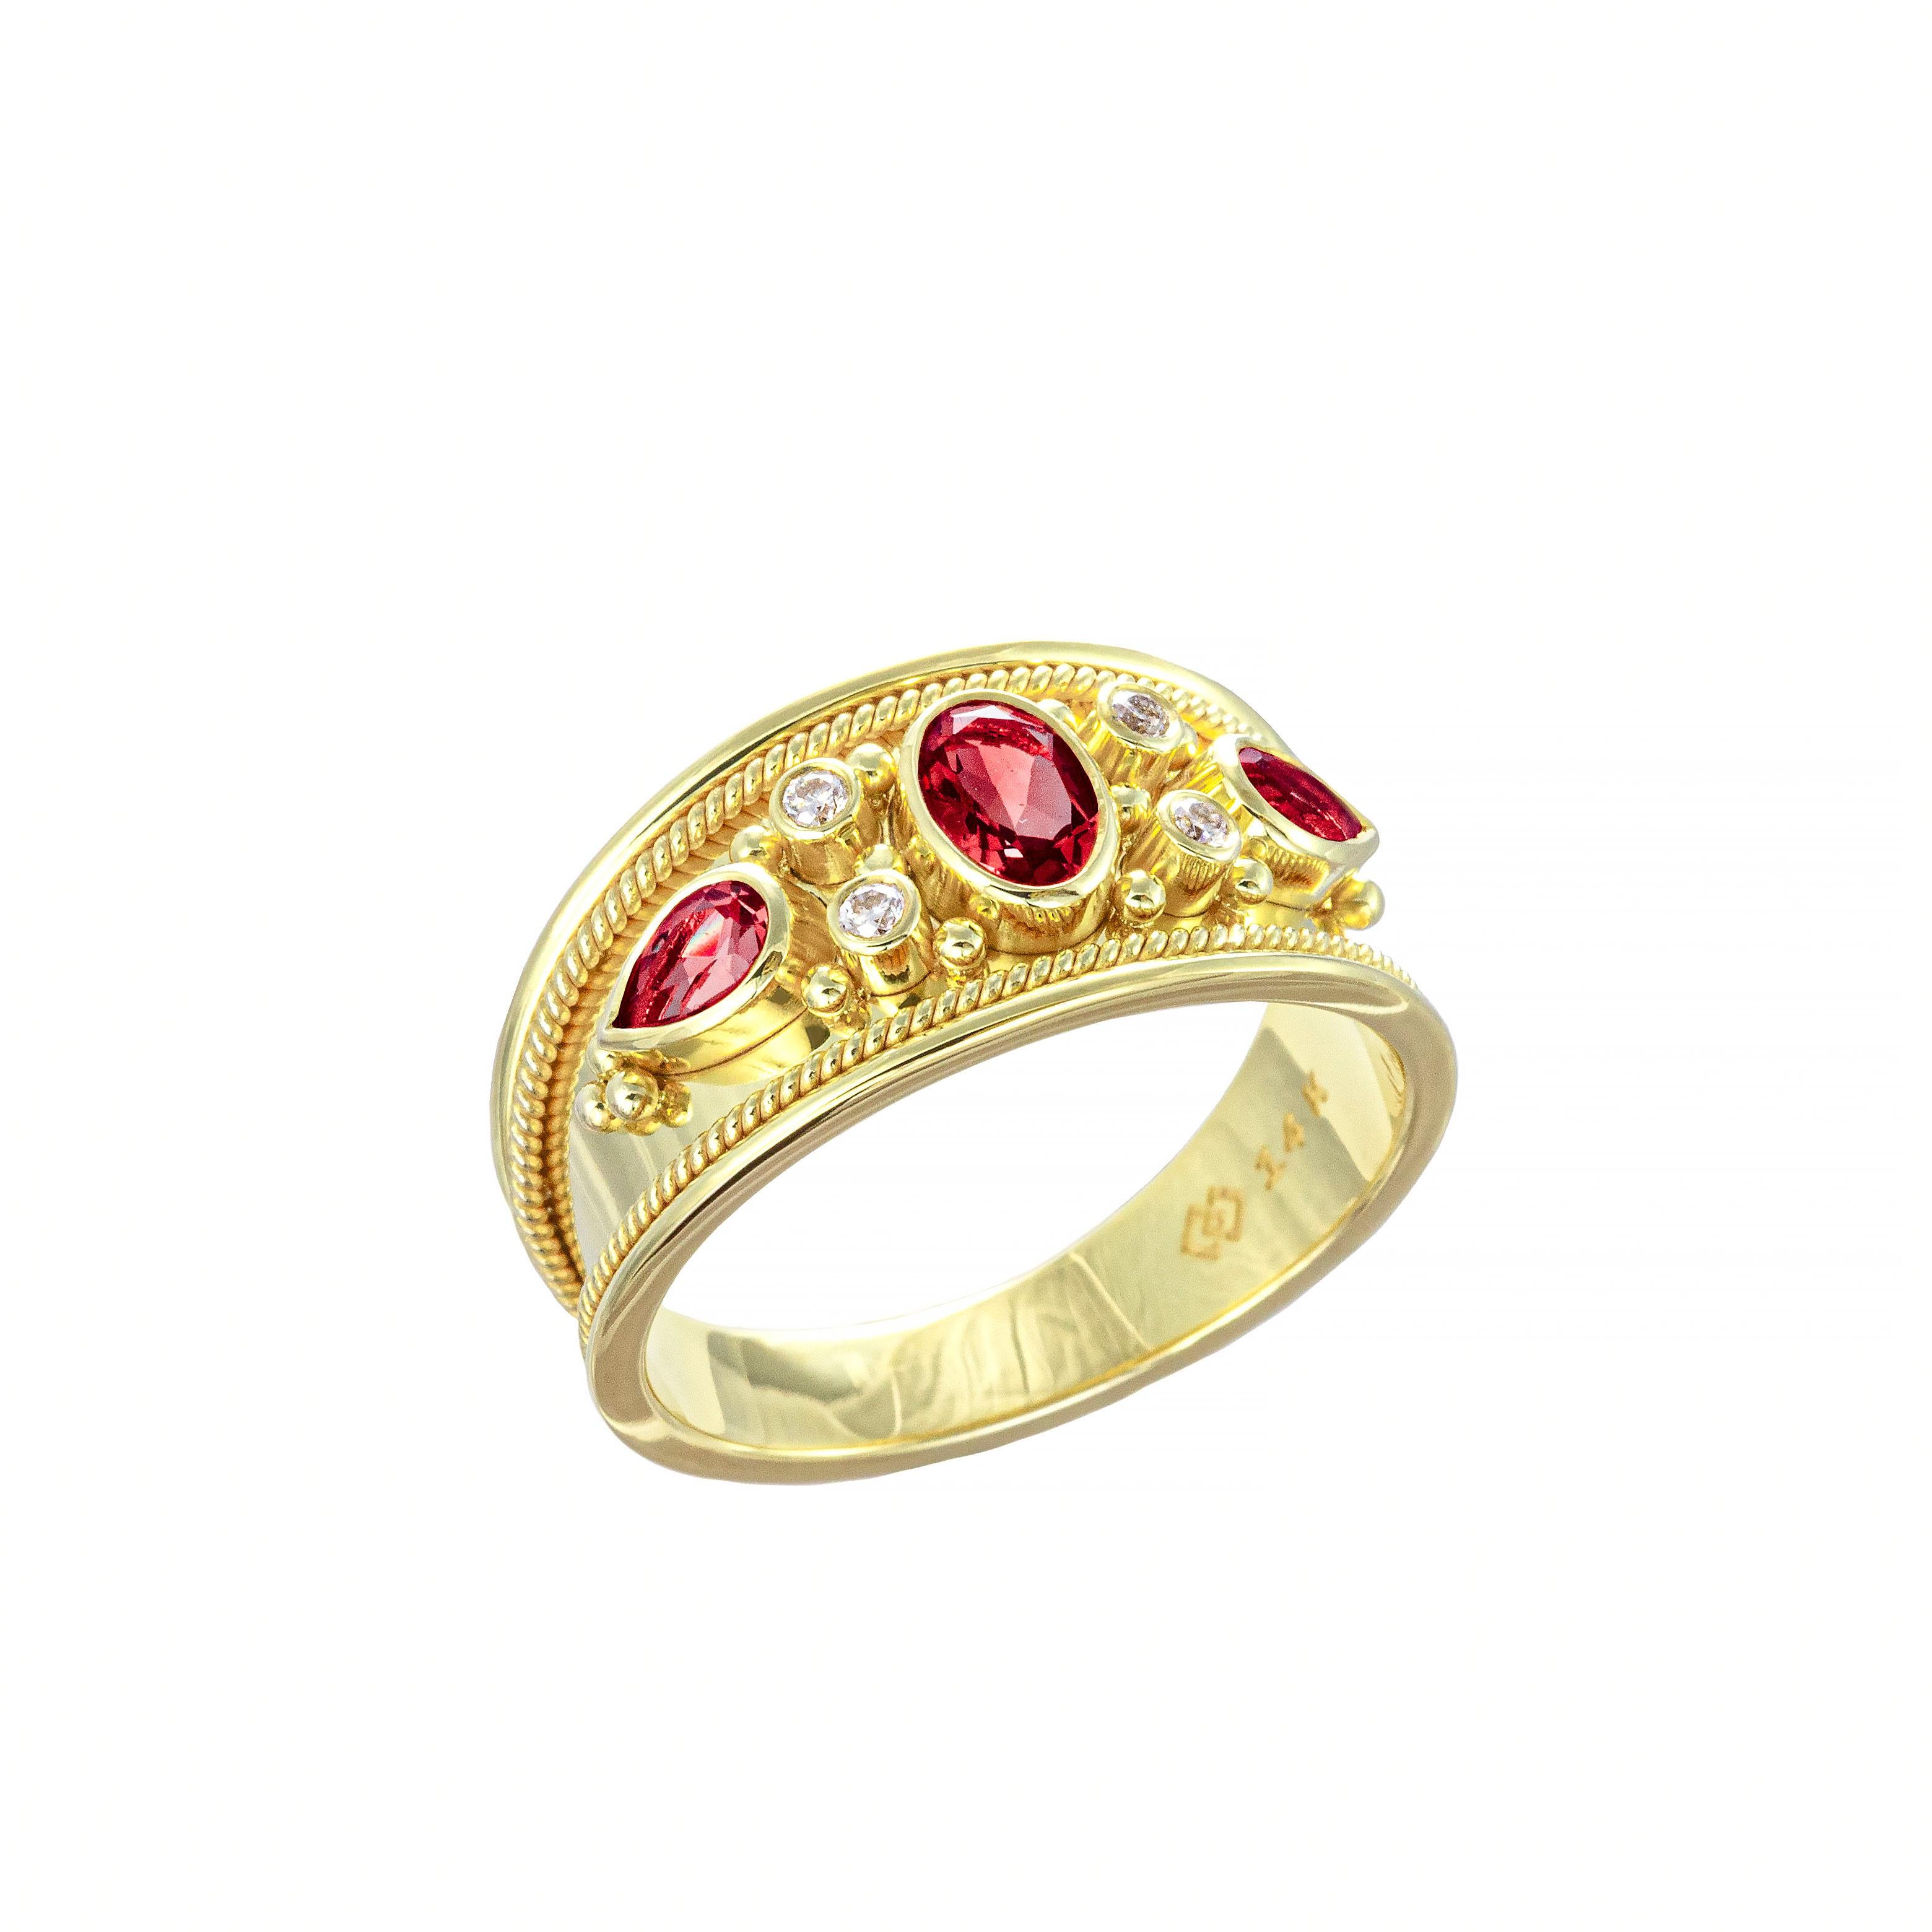 Women's Byzantine Gold Ring with Rubies Diamonds and a Shiny Finish For Sale